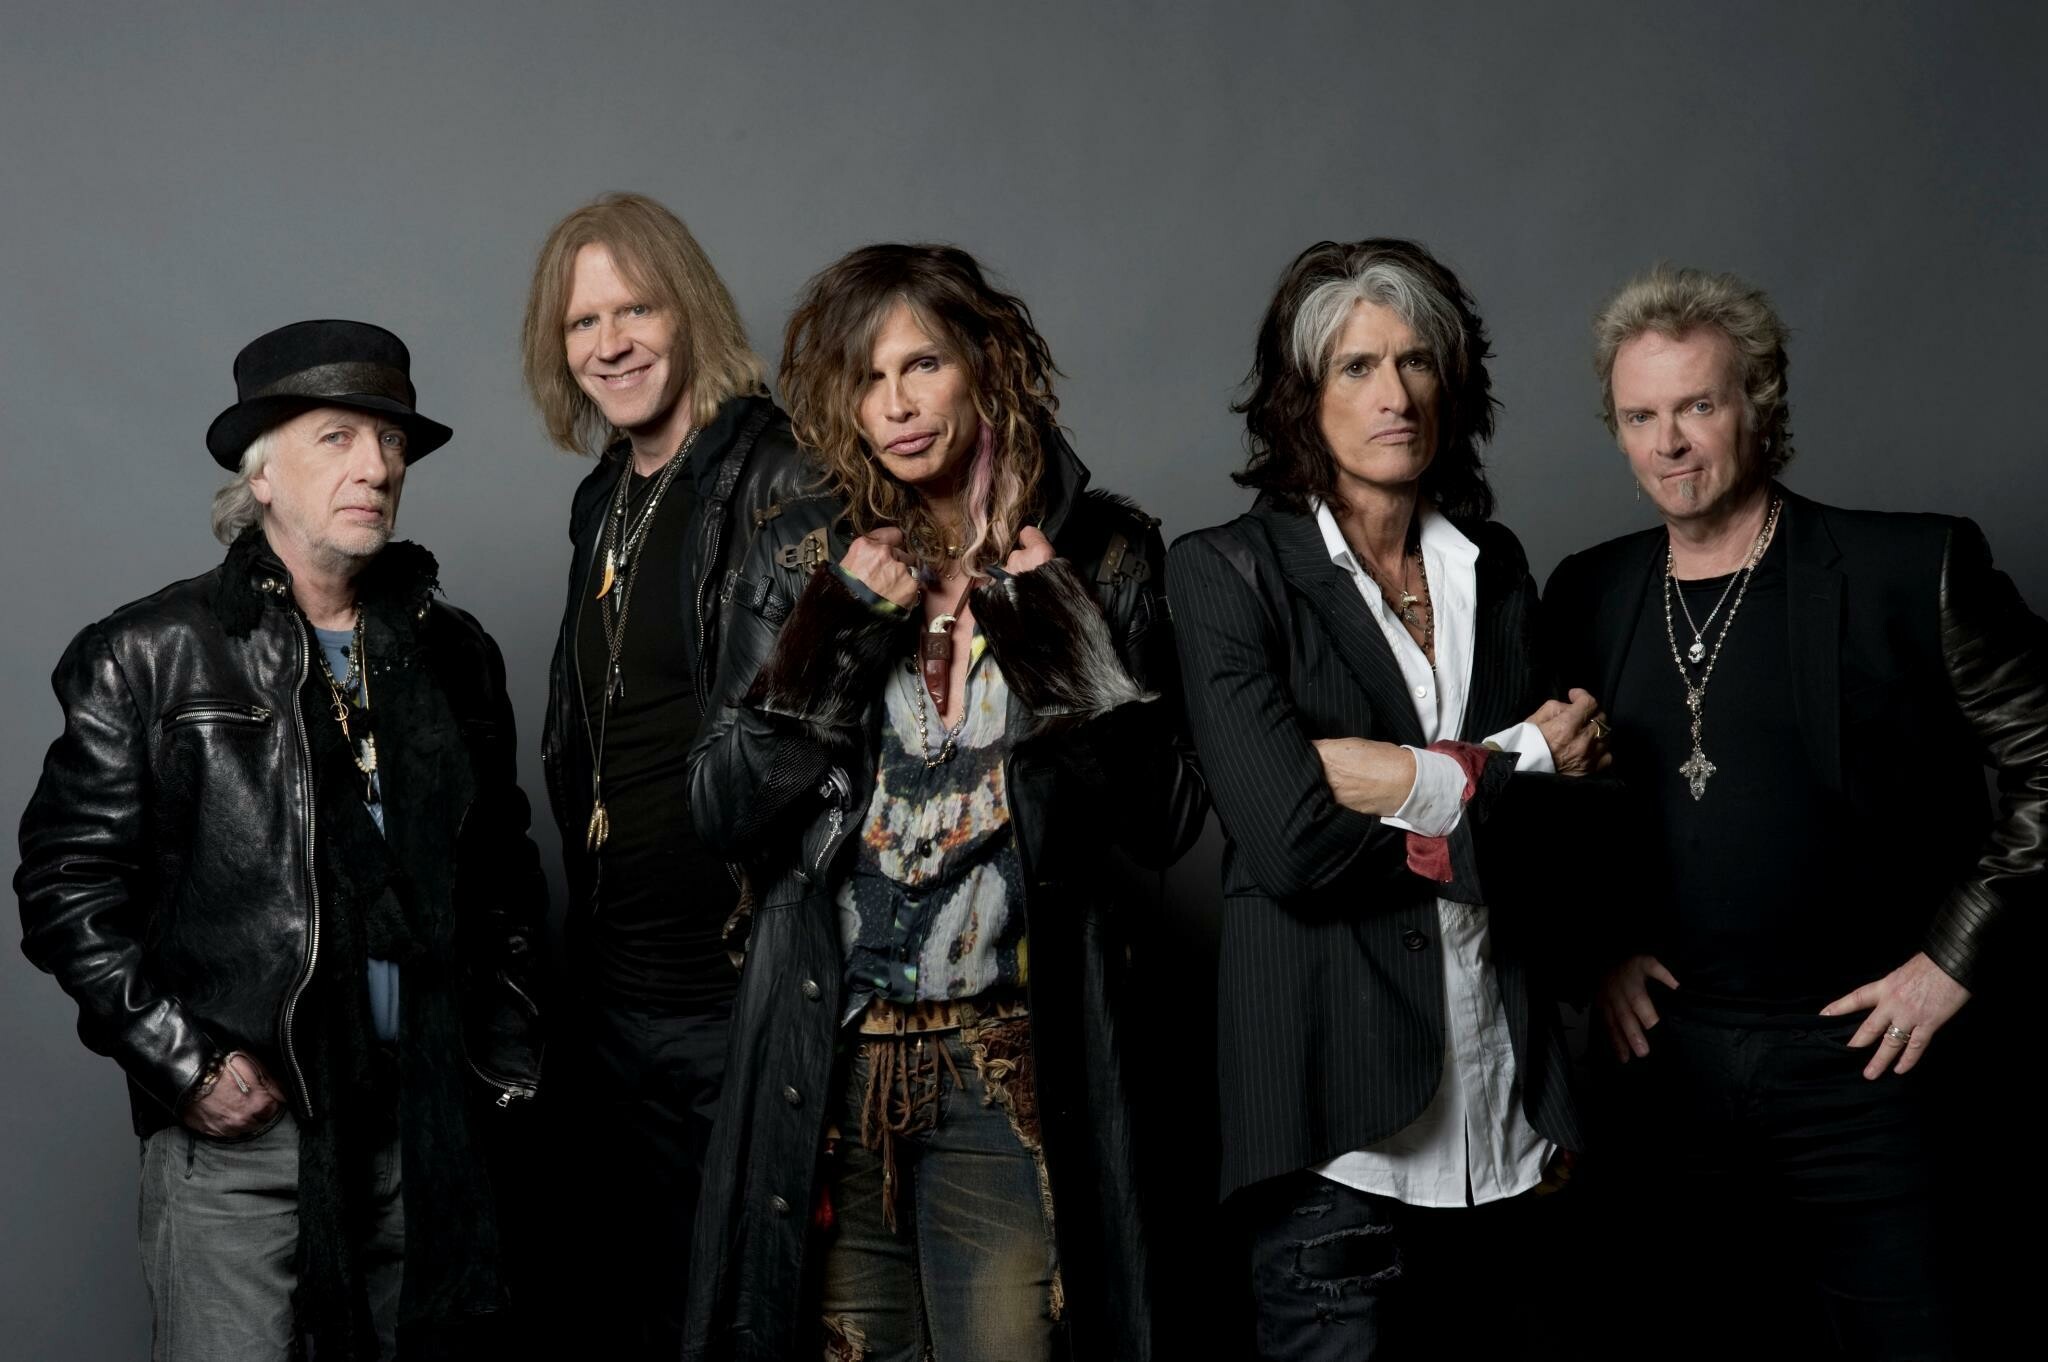 Aerosmith: "Dream On" was the band's first major hit and became a classic rock radio staple. 2050x1370 HD Background.